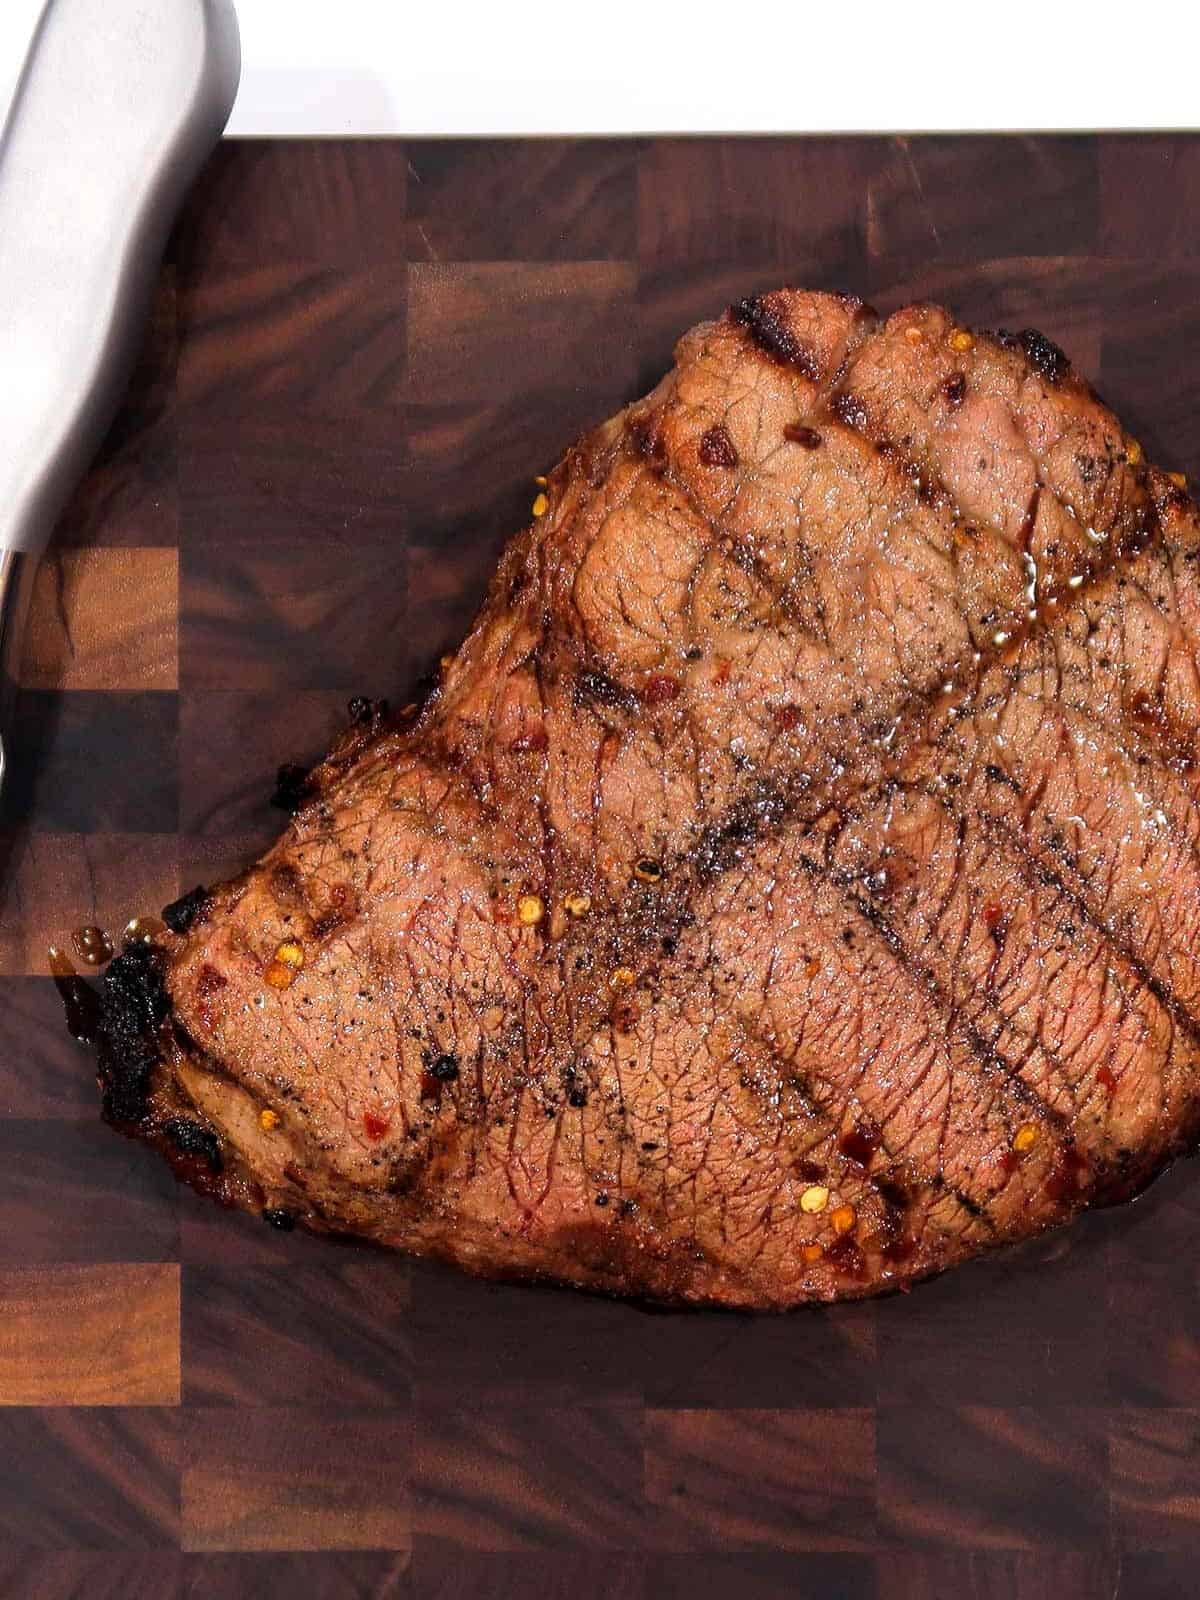 Grilled London broil on a cutting board.